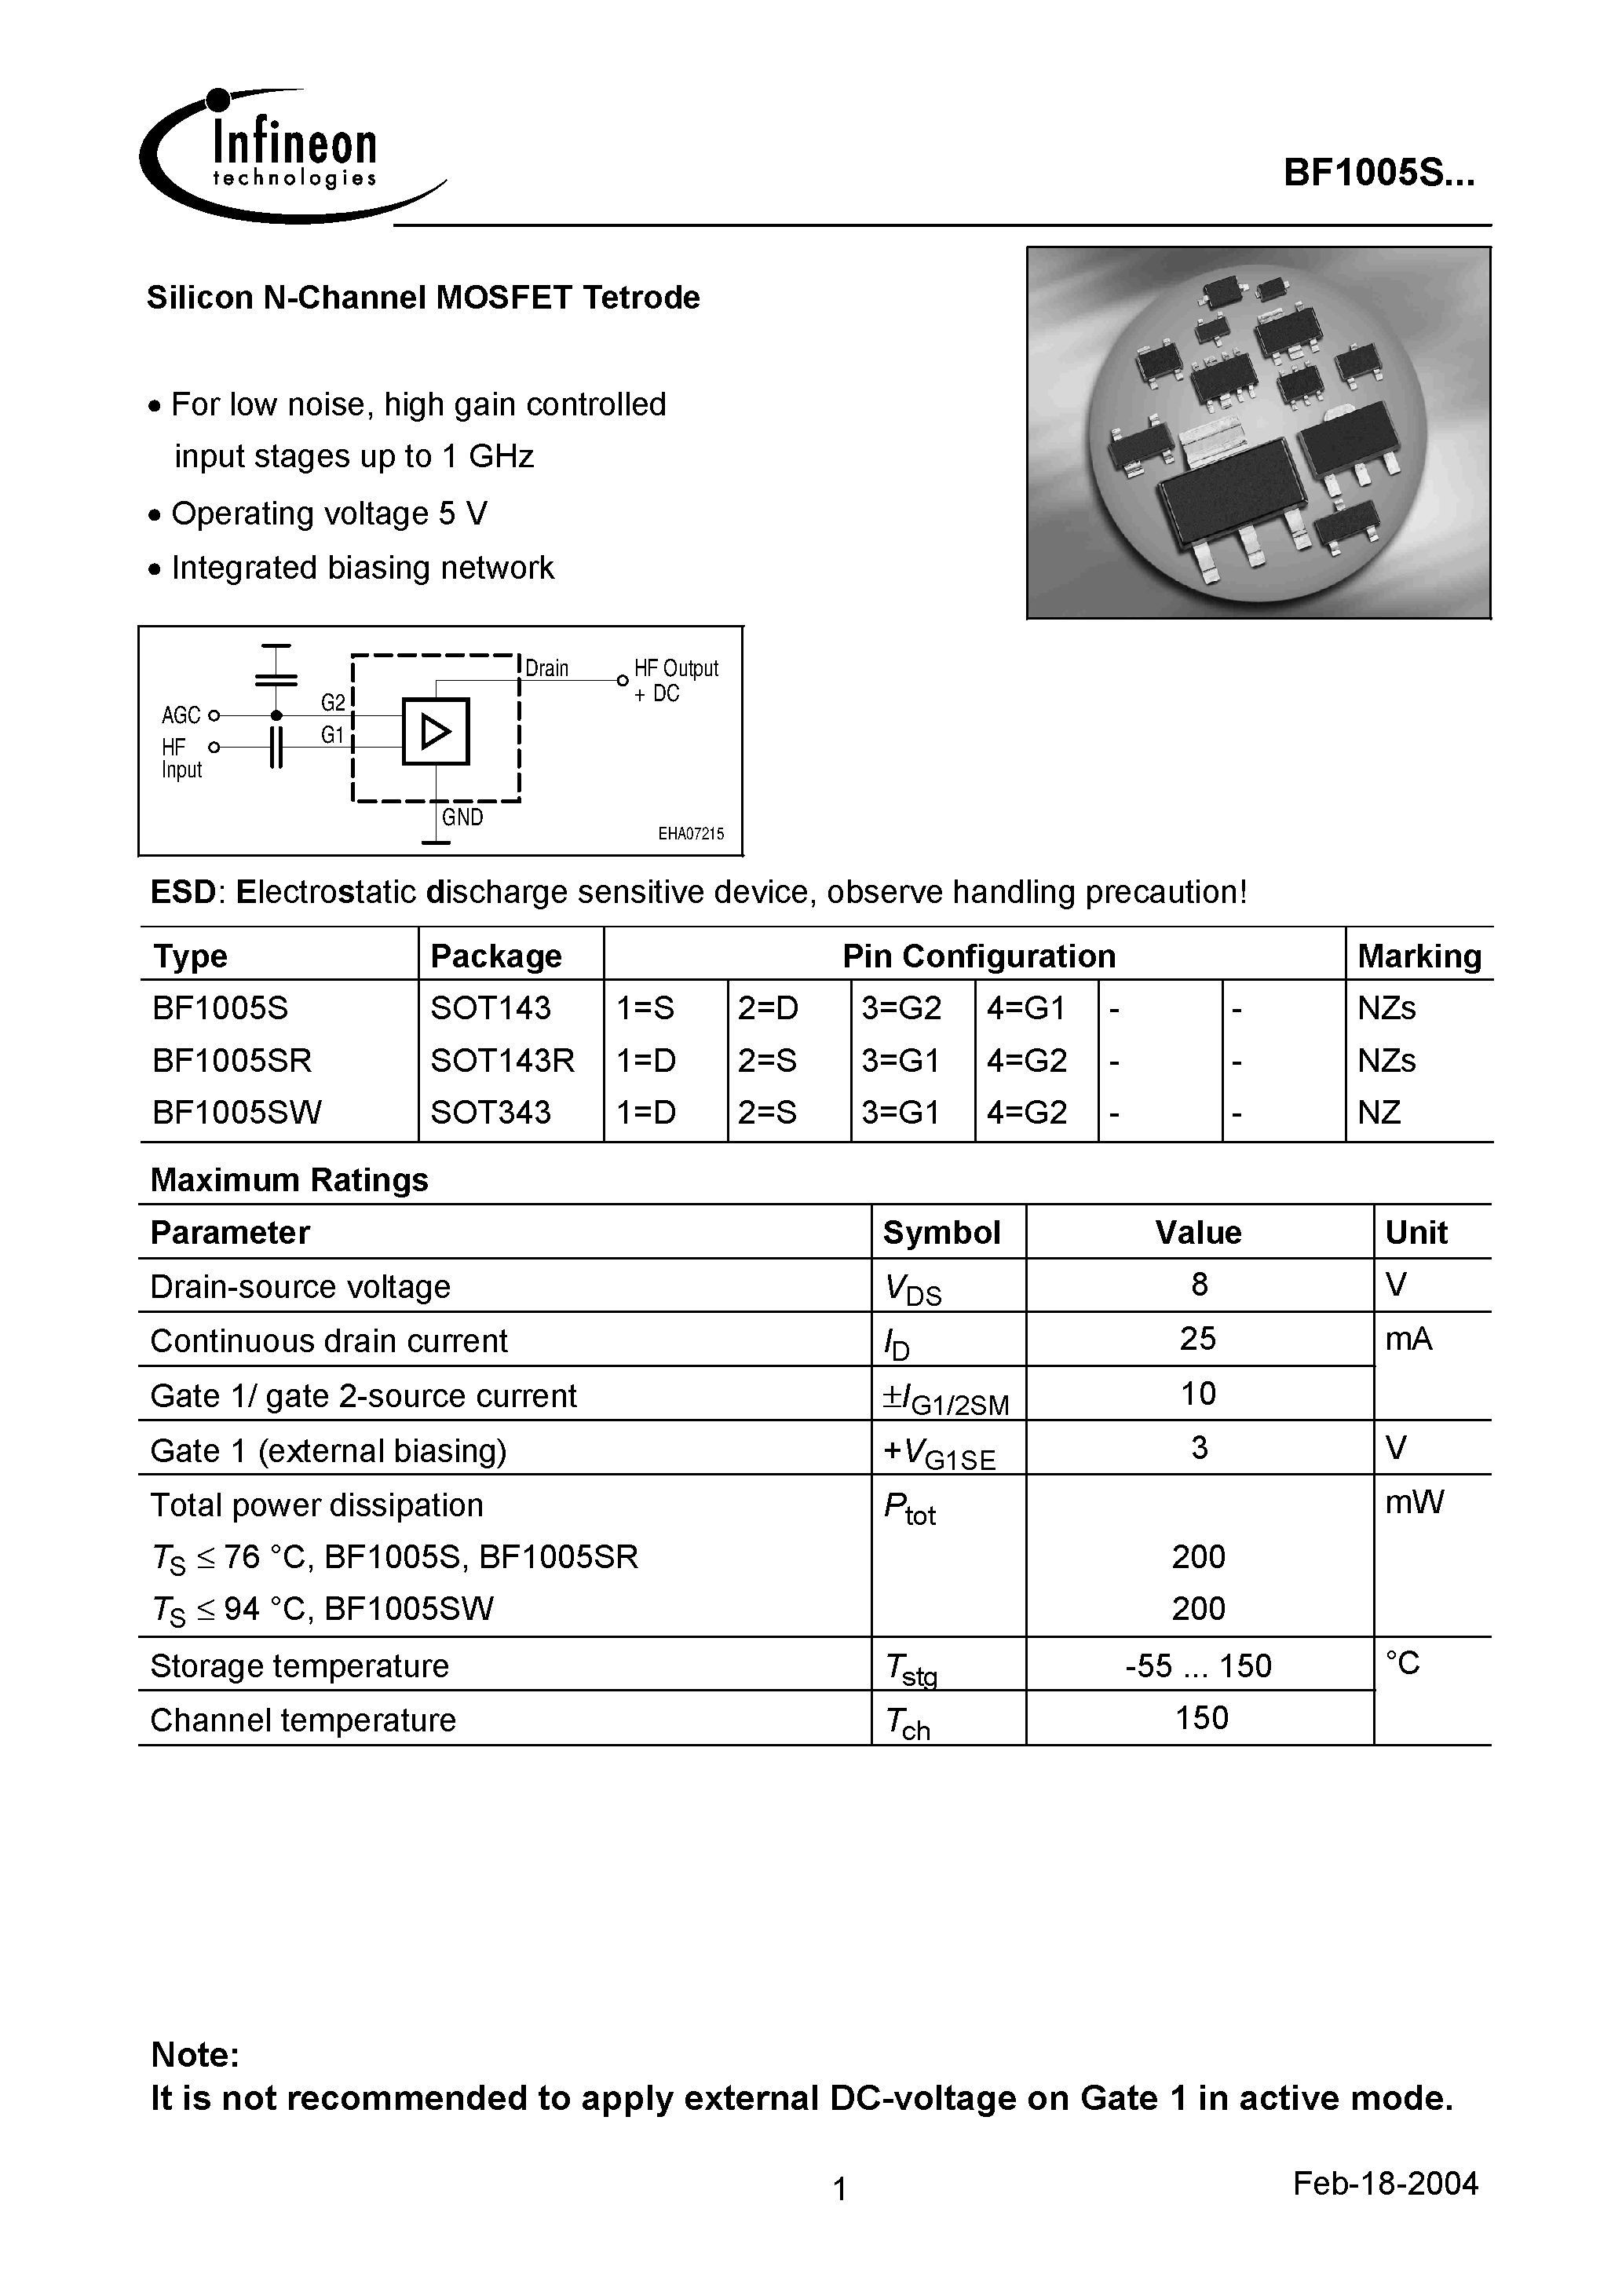 Даташит BF1005SR - Silicon N-Channel MOSFET Tetrode страница 1